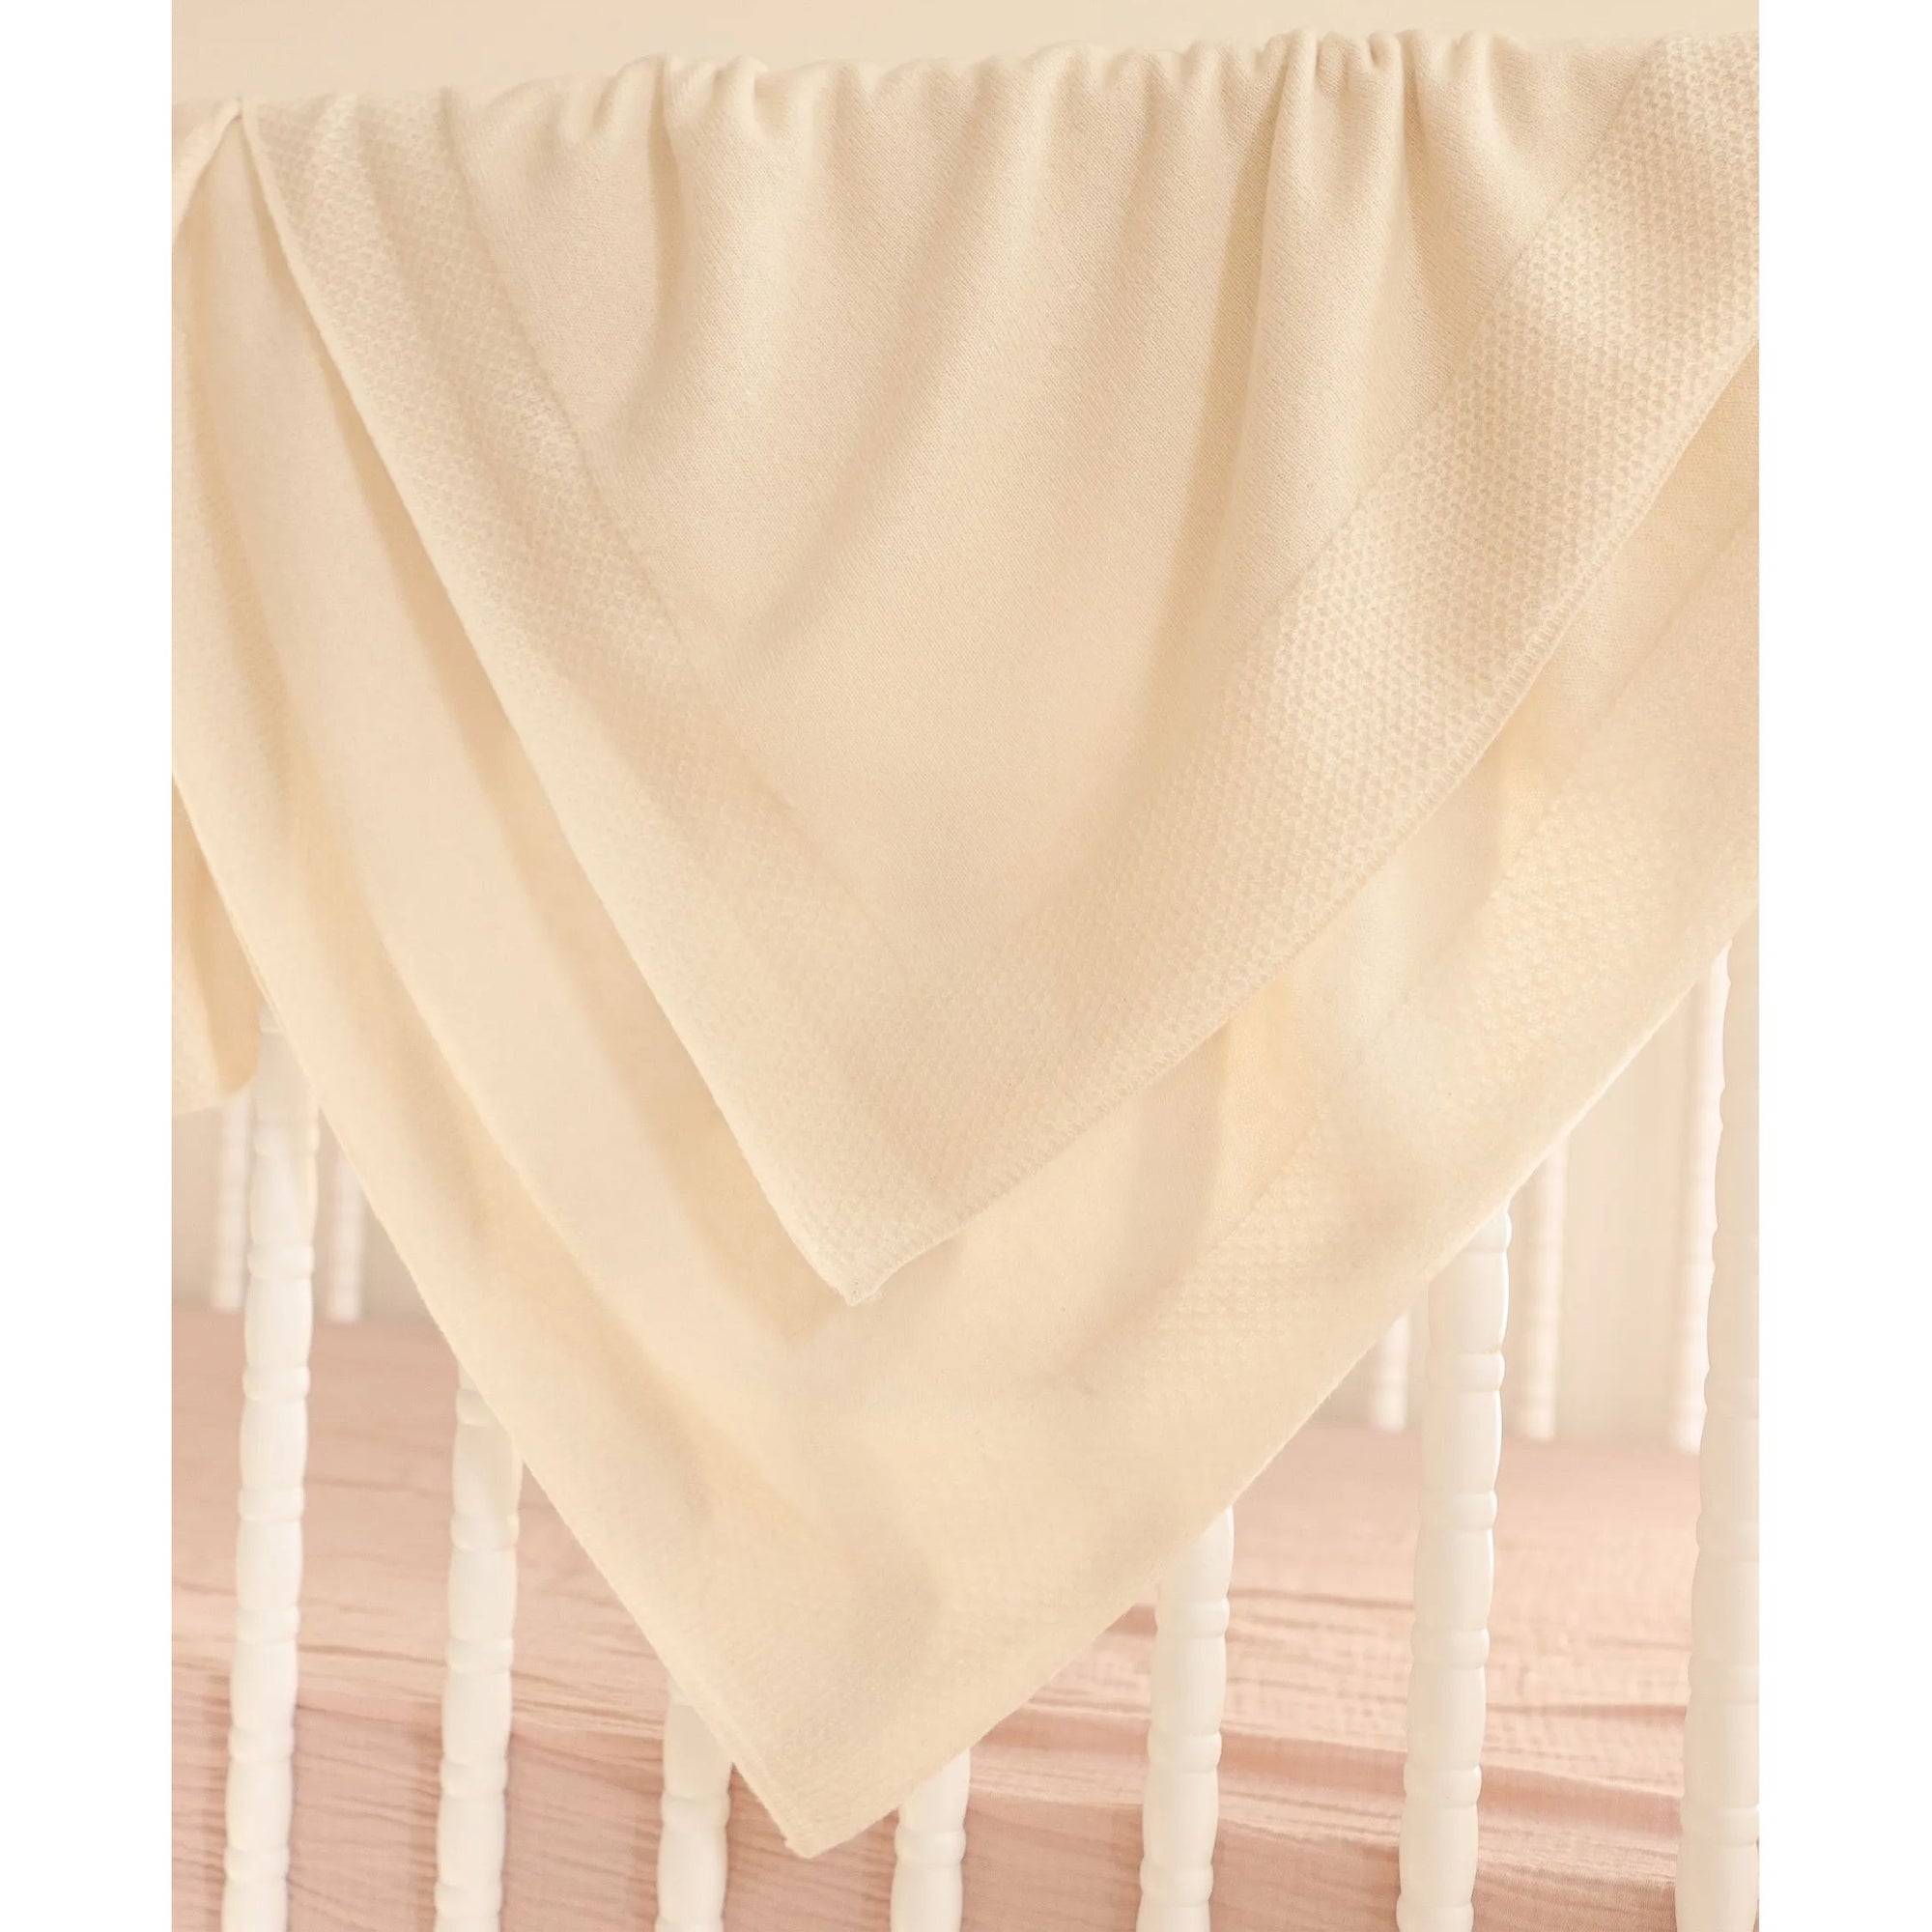 100% Cashmere Hayden Honeycomb Edge Baby Blanket (Choice of Colors) by Alashan Cashmere